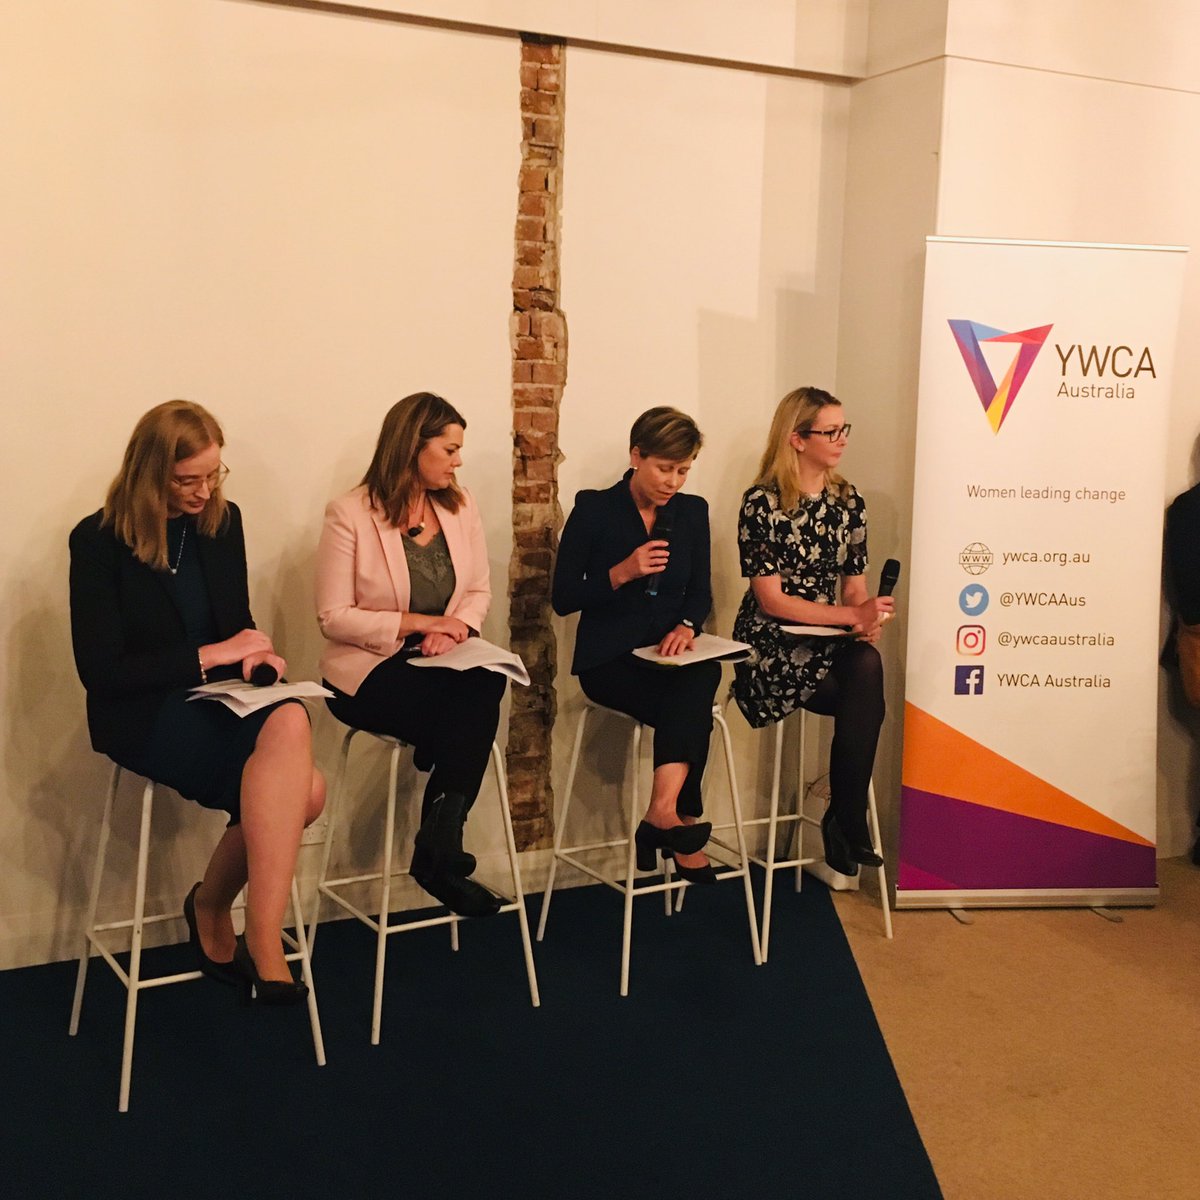 Great to be at #SHEvotes @YWCAAus & @YWCAAdelaide event  #AusVotes2019⁠ ⁠